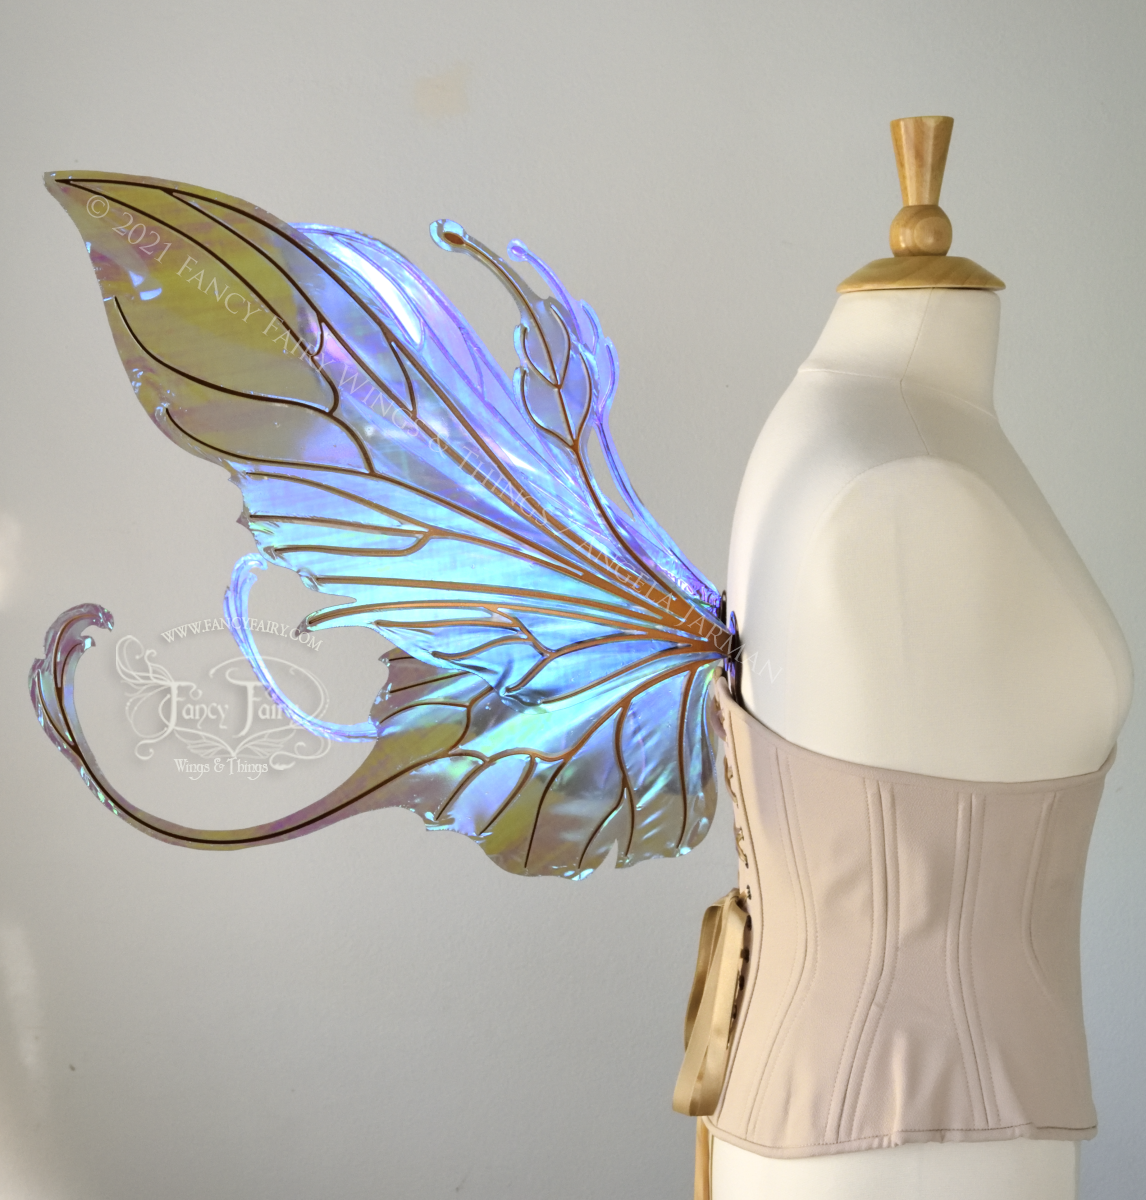 Elvina Iridescent Convertible Fairy Wings in Dark Crystal with Copper veins